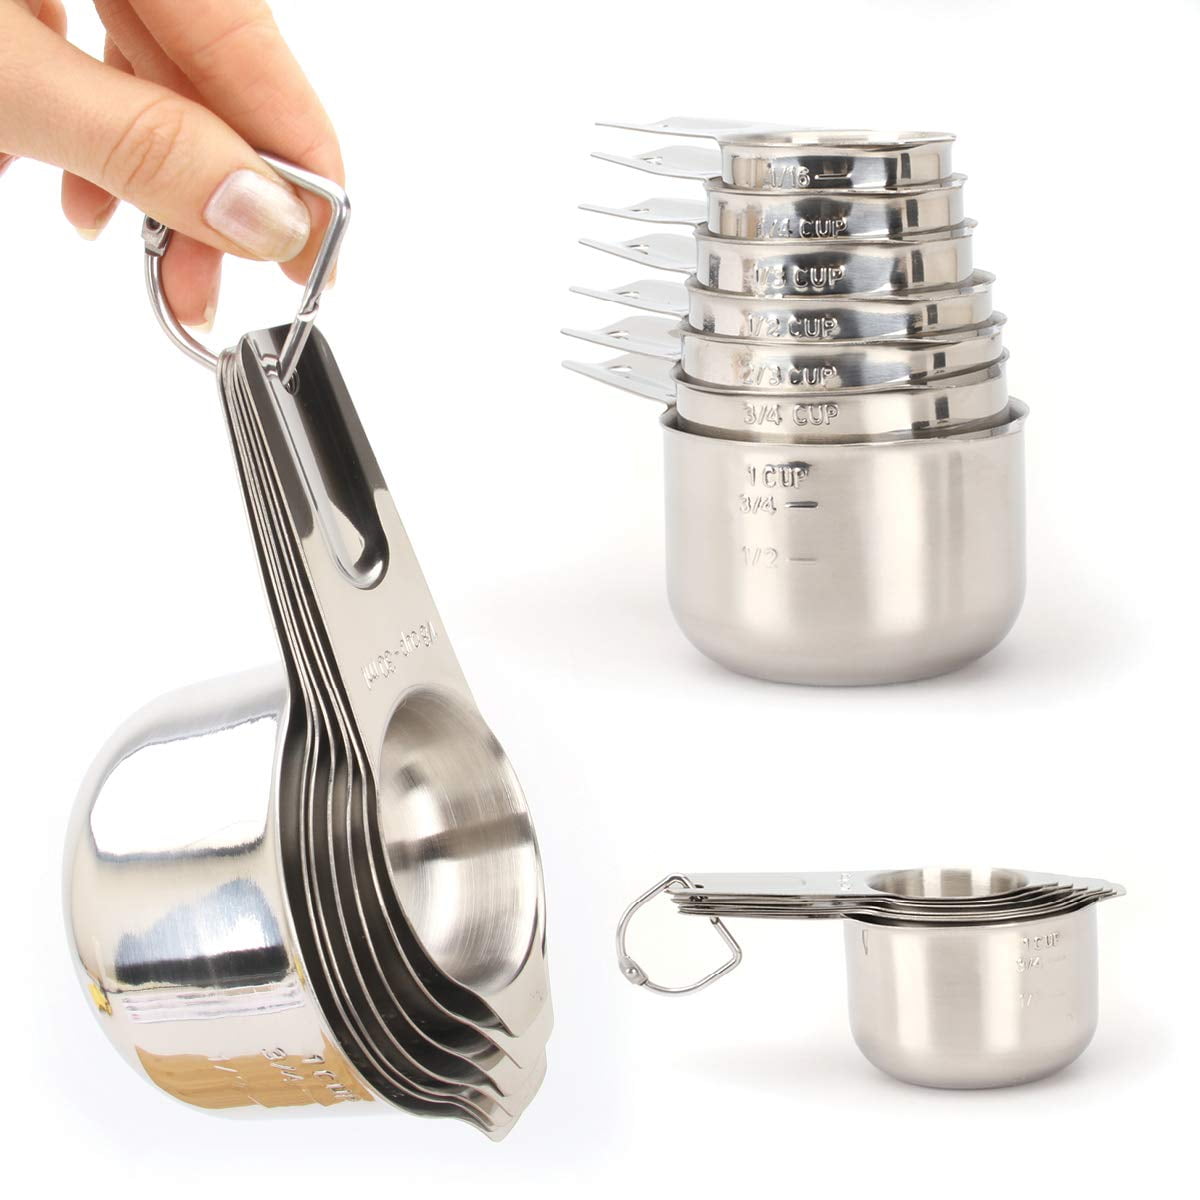 8-Piece 18/8 Stainless Steel Measuring Cup and Spoon Set– DI ORO